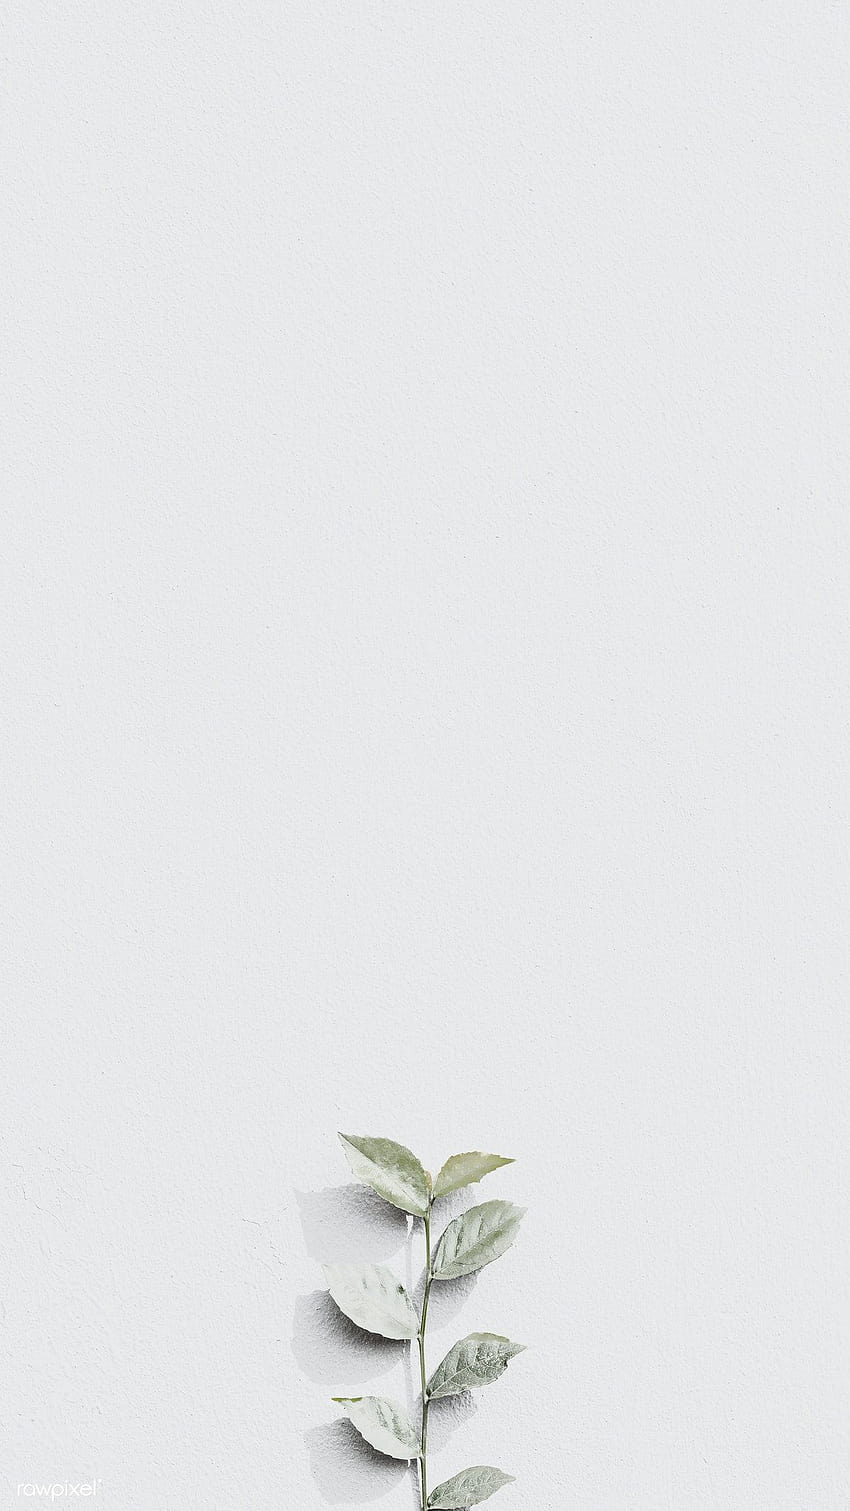 White plant branch on a gray brick wall in natural light backgrounds mobile, white blank HD phone wallpaper